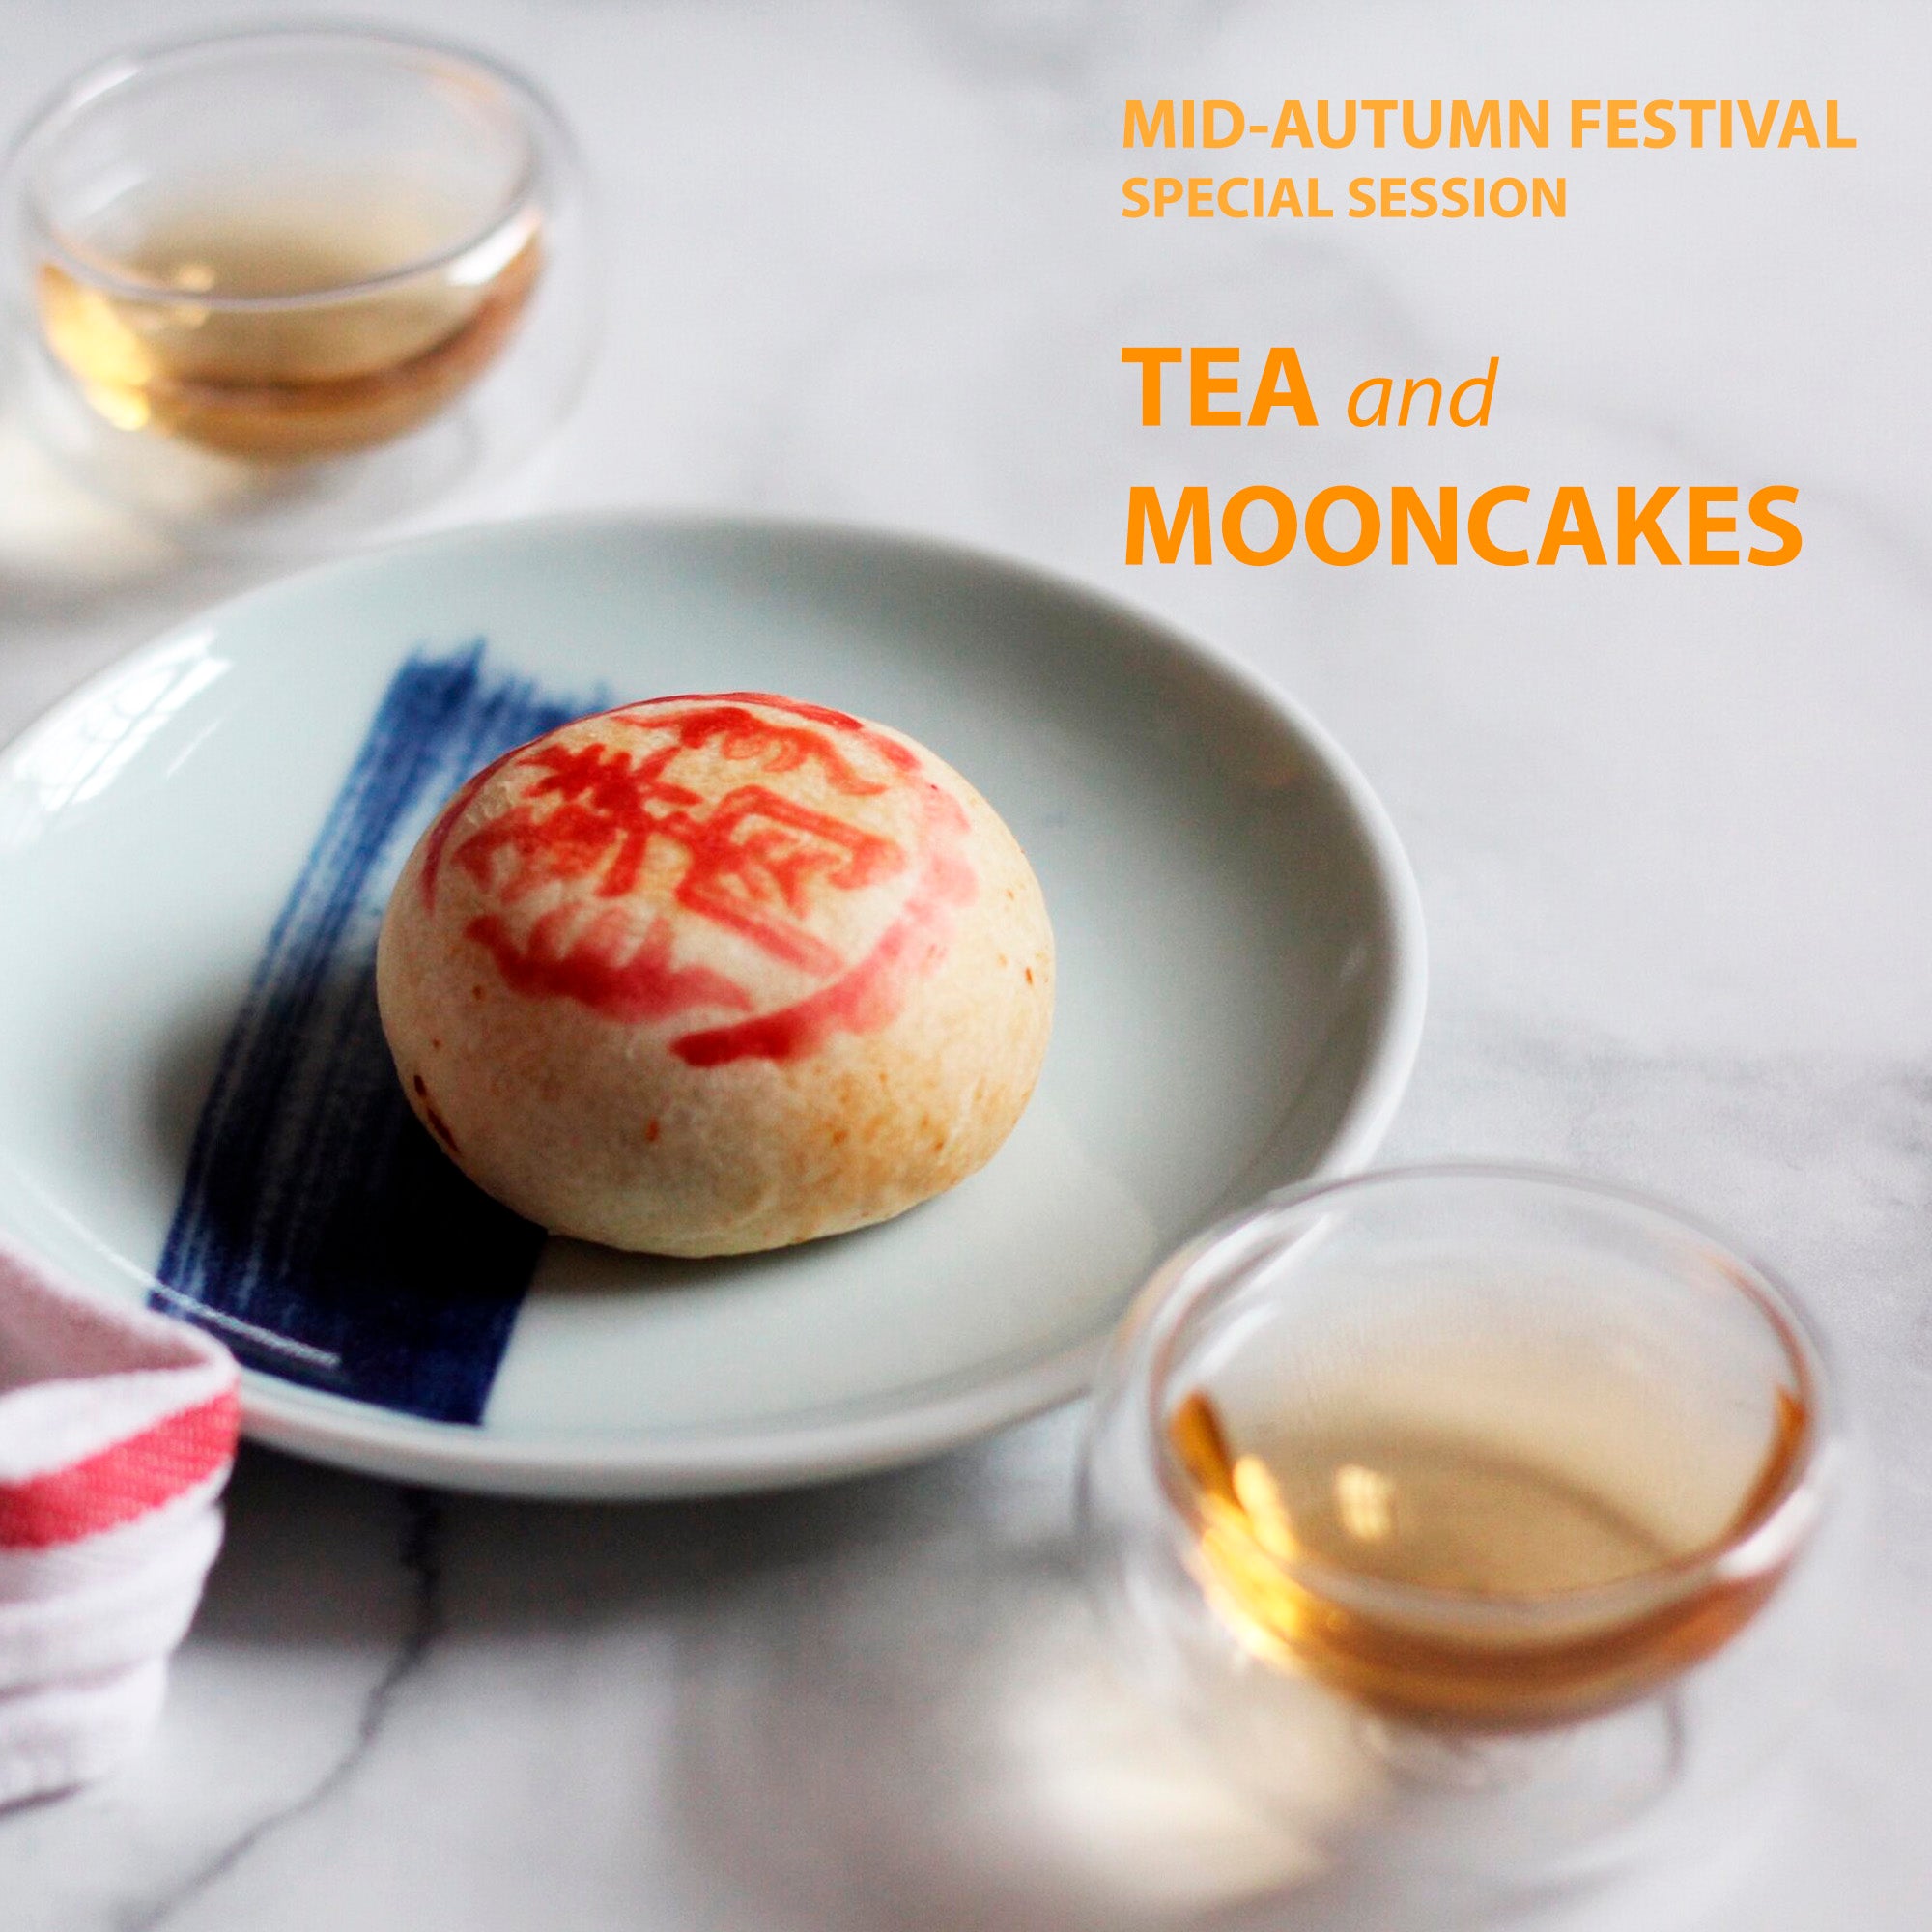 Mid-autumn Festive Celebration: Tea and Mooncakes at 3pm-5pm on Friday 29th 2023